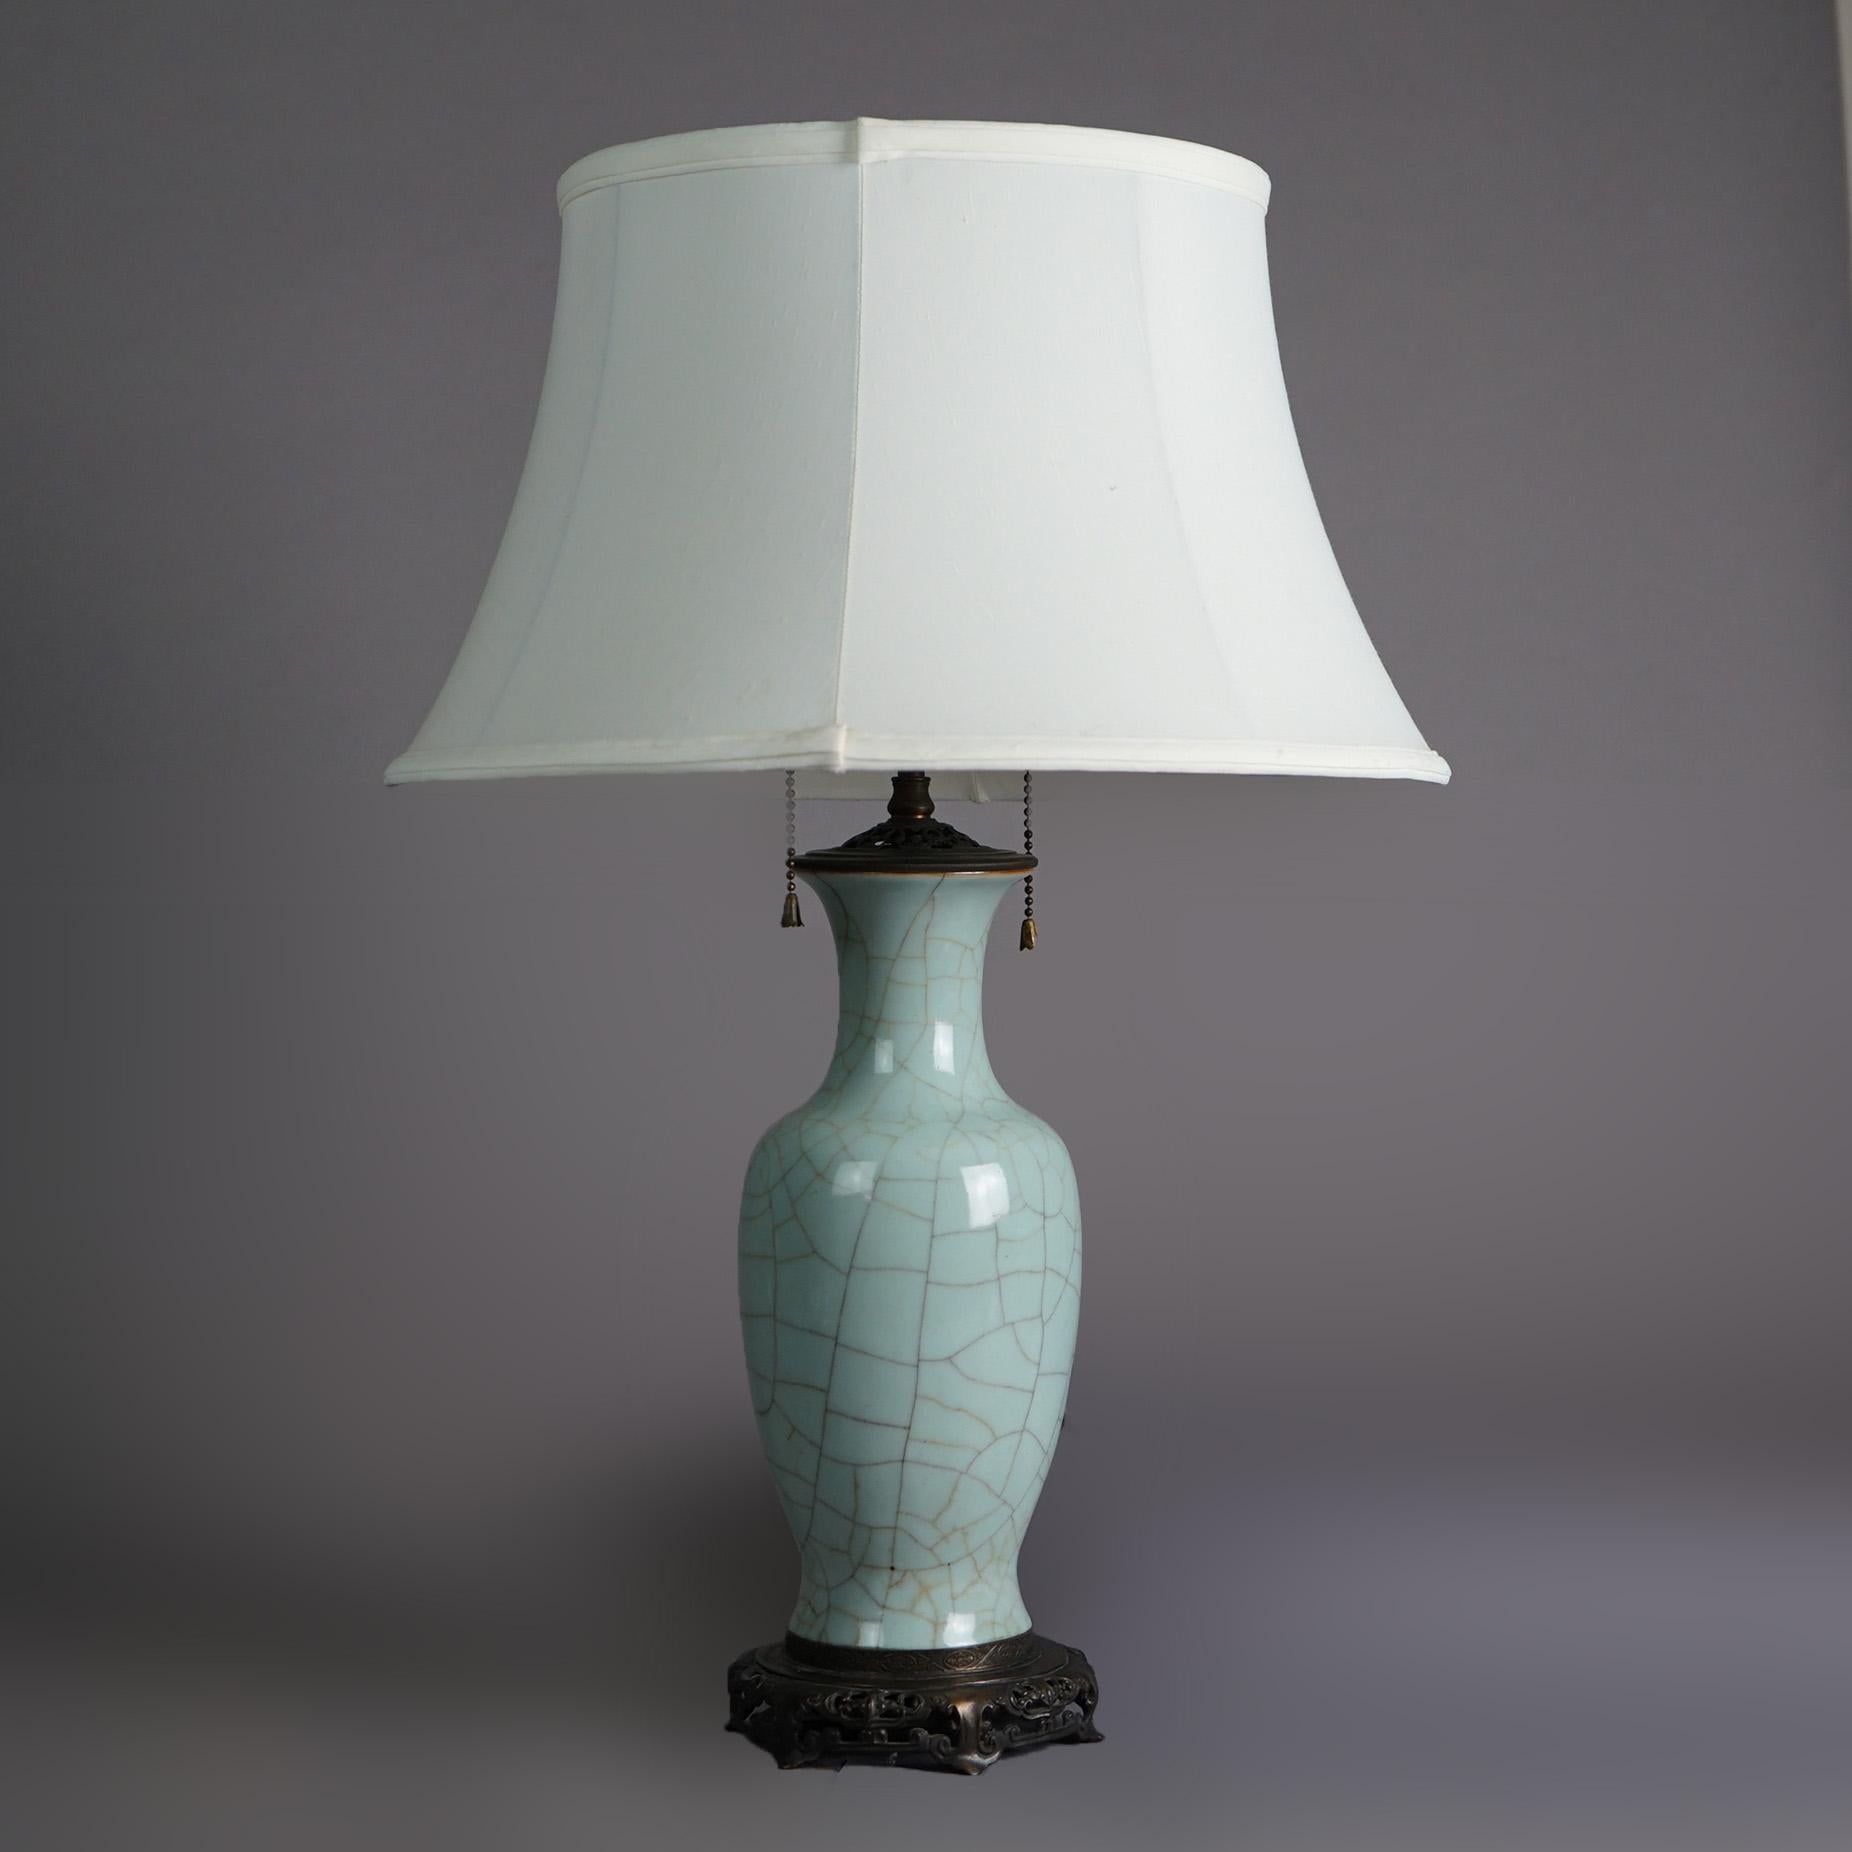 An antique table lamp offers Chinese art pottery vase with crackled celedon glazing, c1930

Measures - 23